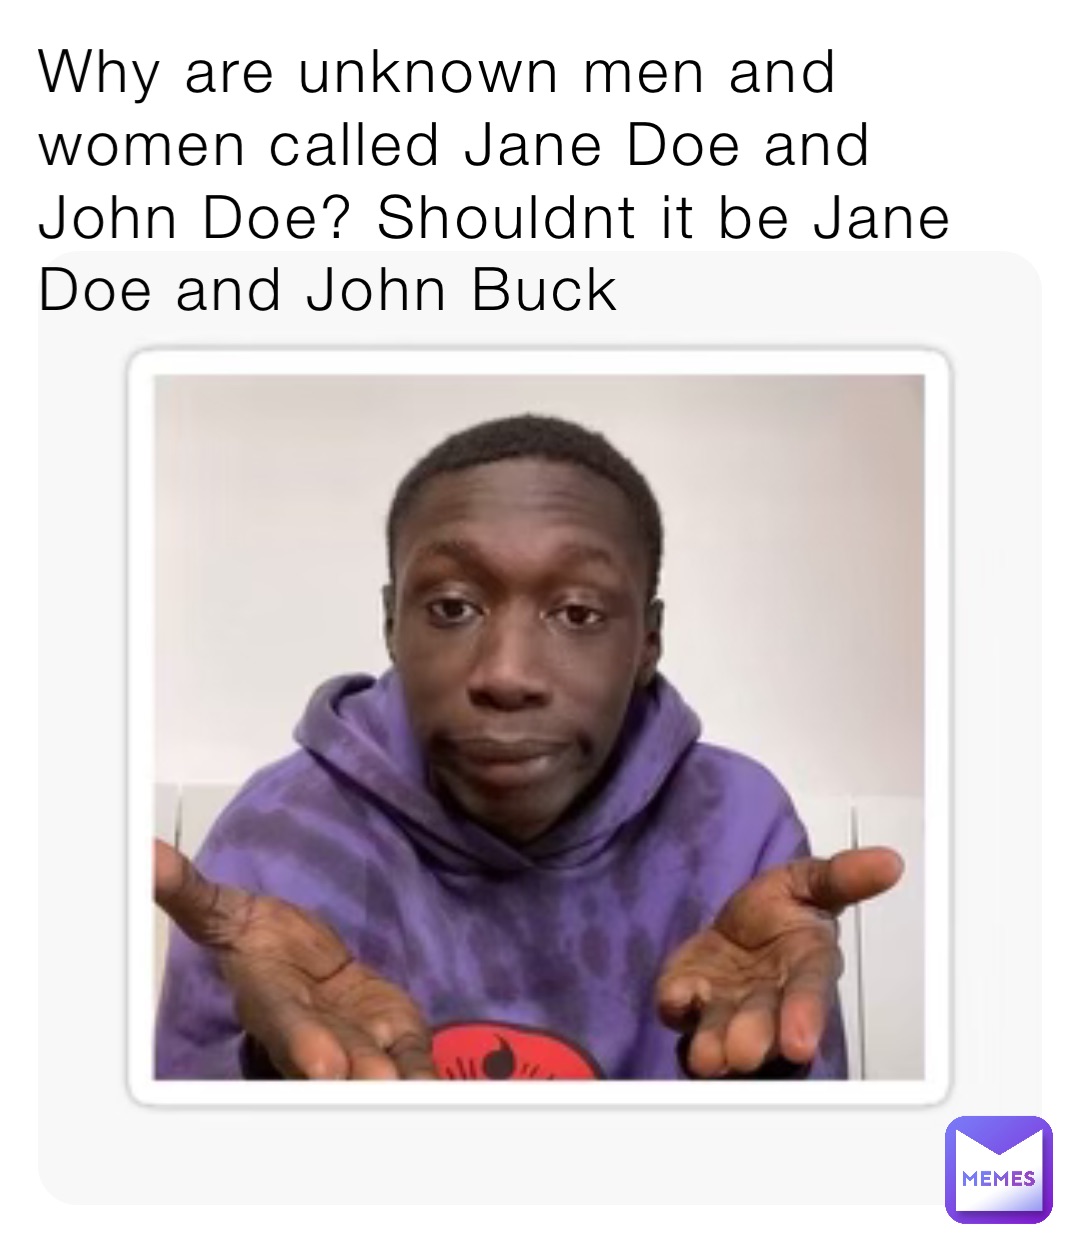 Why are unknown men and women called Jane Doe and John Doe? Shouldnt it be Jane Doe and John Buck